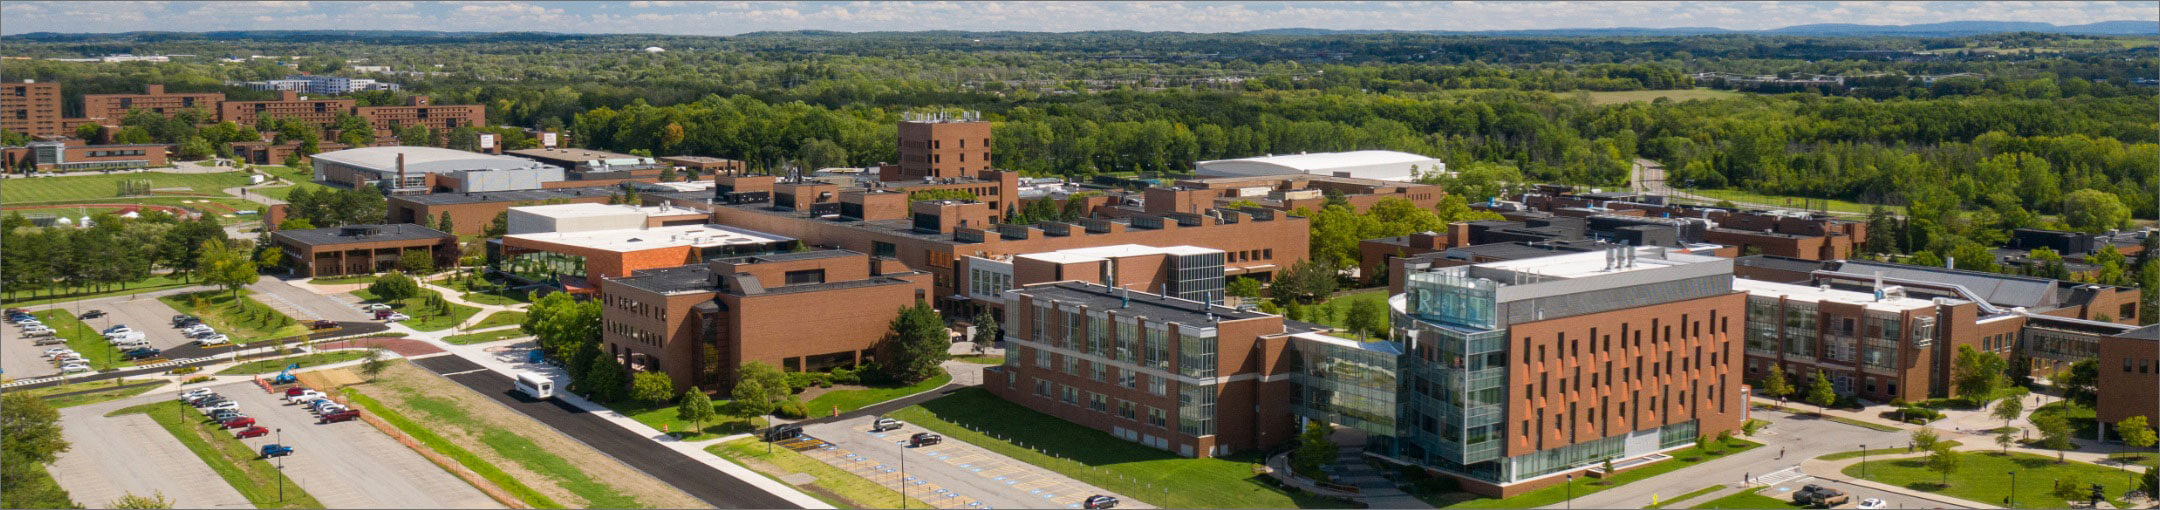 An aerial view of the R I T campus, focused on the academic side of campus.